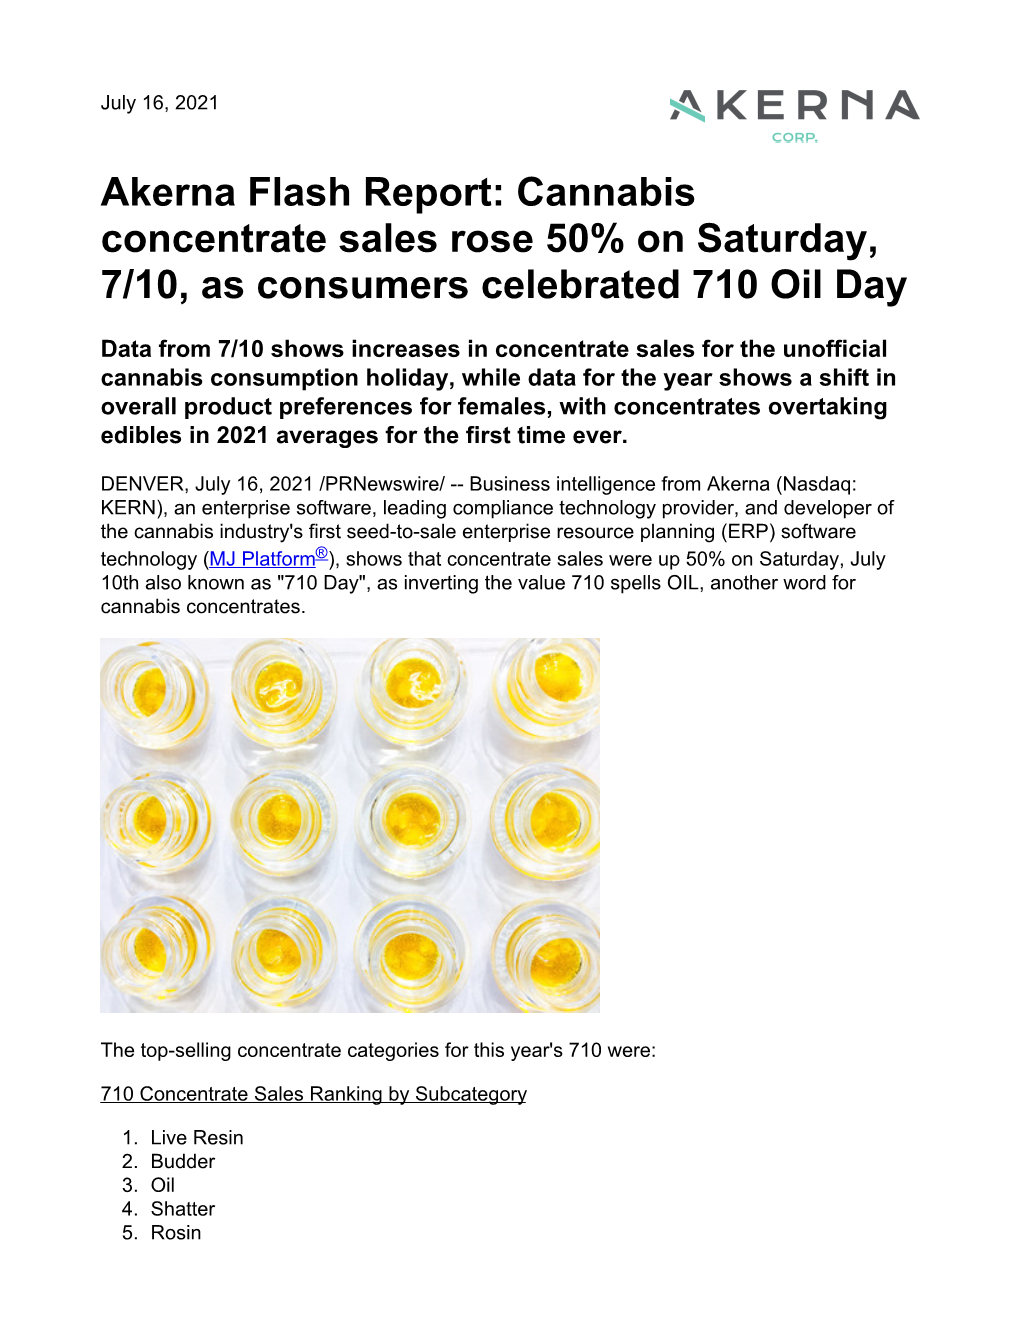 Akerna Flash Report: Cannabis Concentrate Sales Rose 50% on Saturday, 7/10, As Consumers Celebrated 710 Oil Day